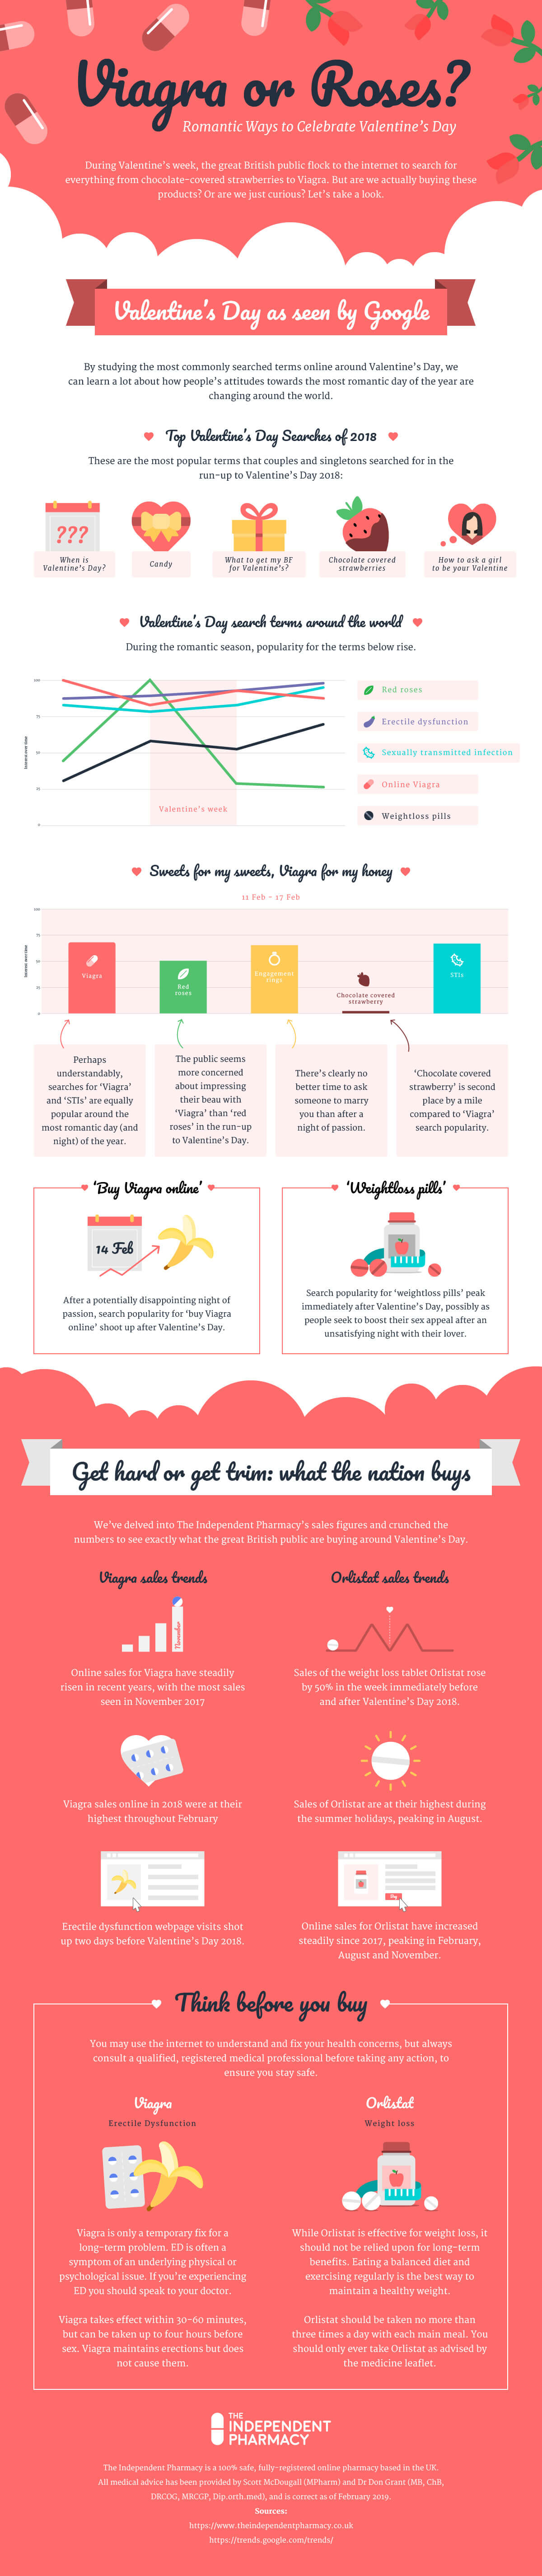 Viagra or Roses Infographic